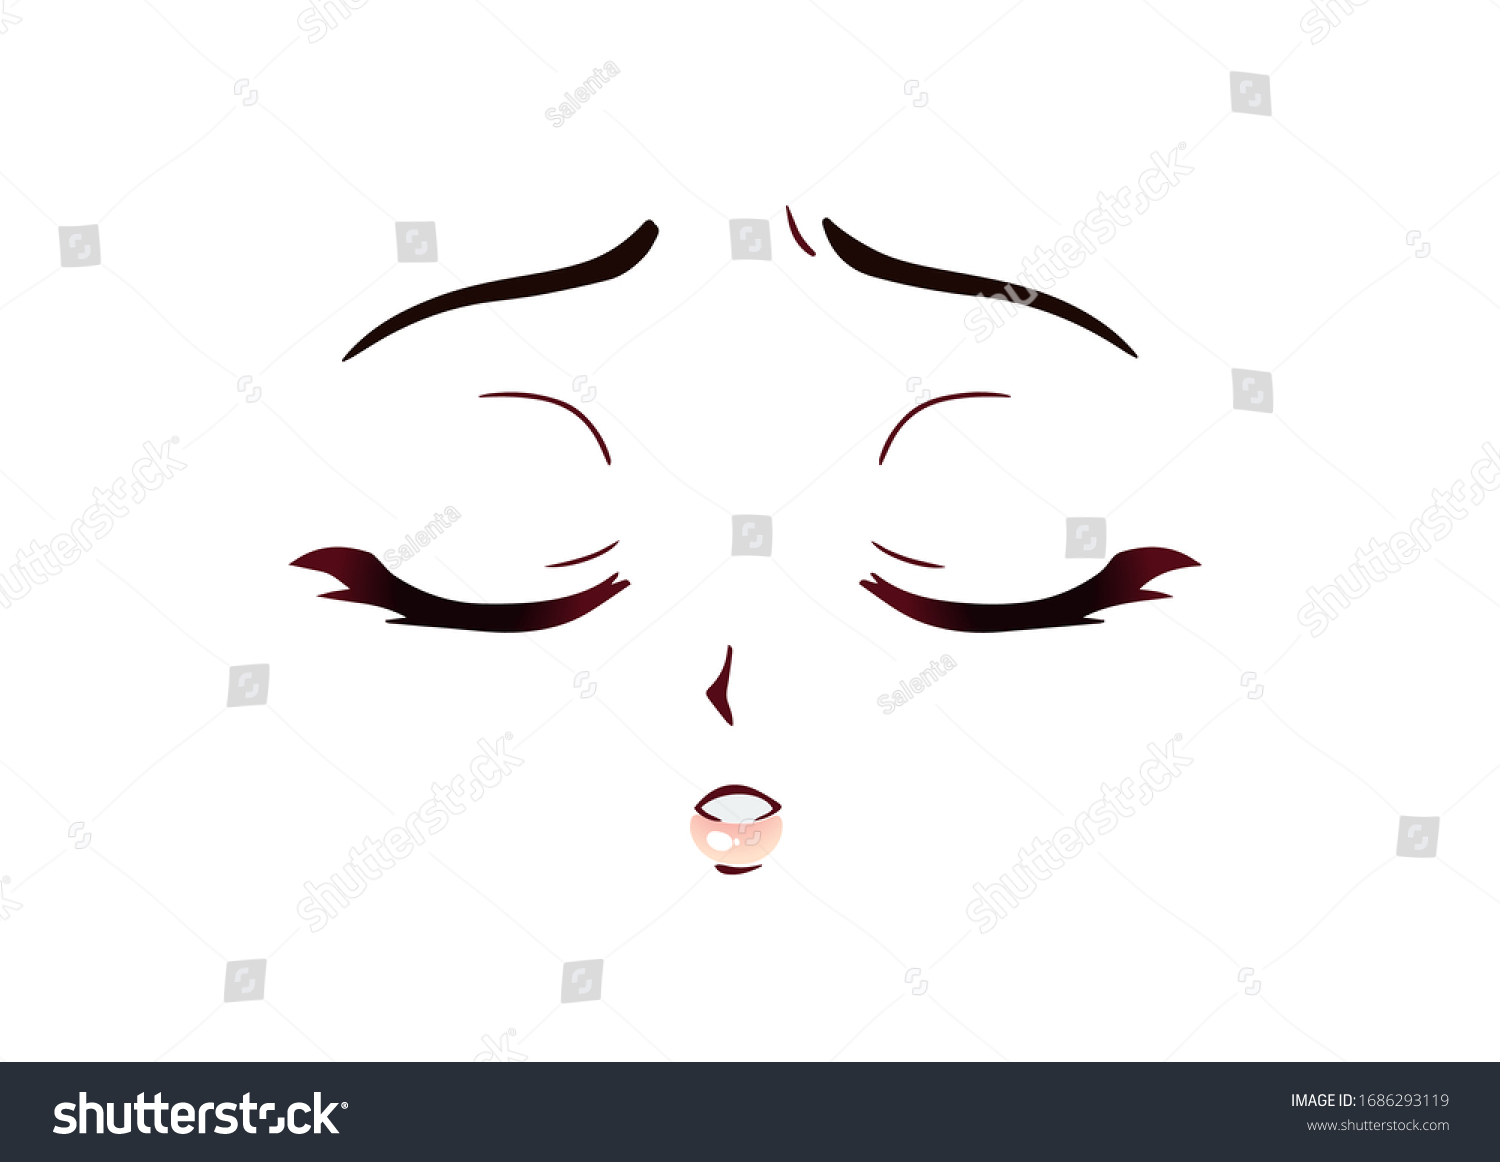 590 Closed Eyes Anime Images, Stock Photos & Vectors | Shutterstock